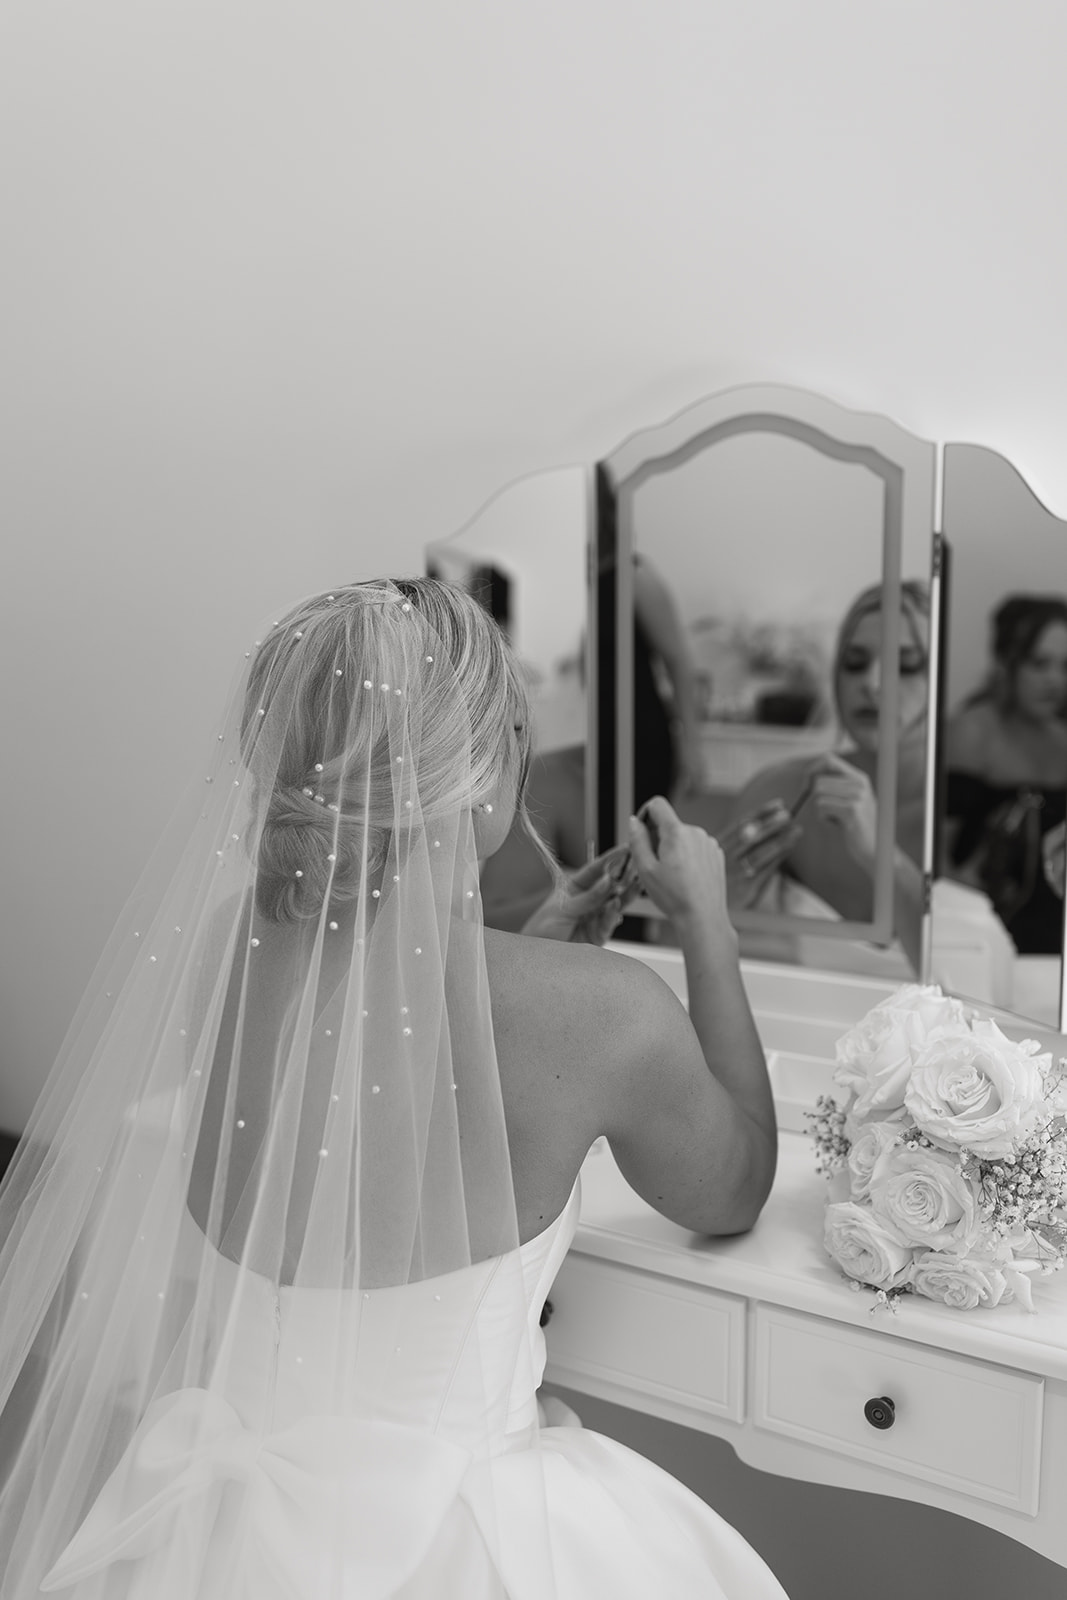 hangar 21 wedding fullerton california bride getting ready pictures bride sitting in front of a mirror bridal veil tulle